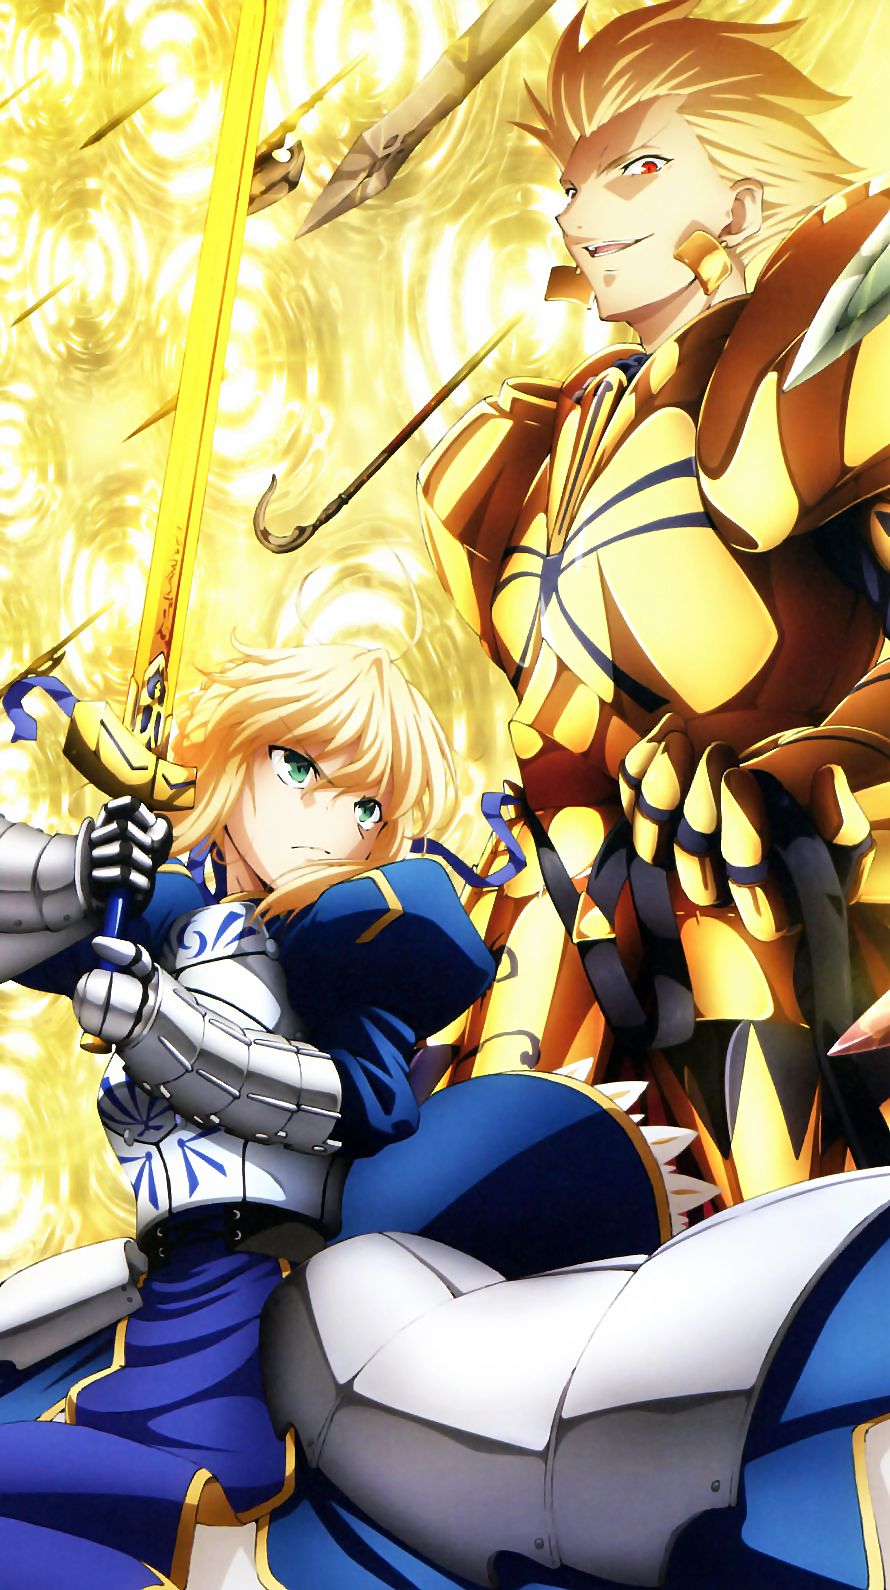 Fate Iphone壁紙画像 Androidスマホ壁紙 7 Iphone6 Iphone5s アニメ壁紙ネット Pc Android Iphone壁紙 画像